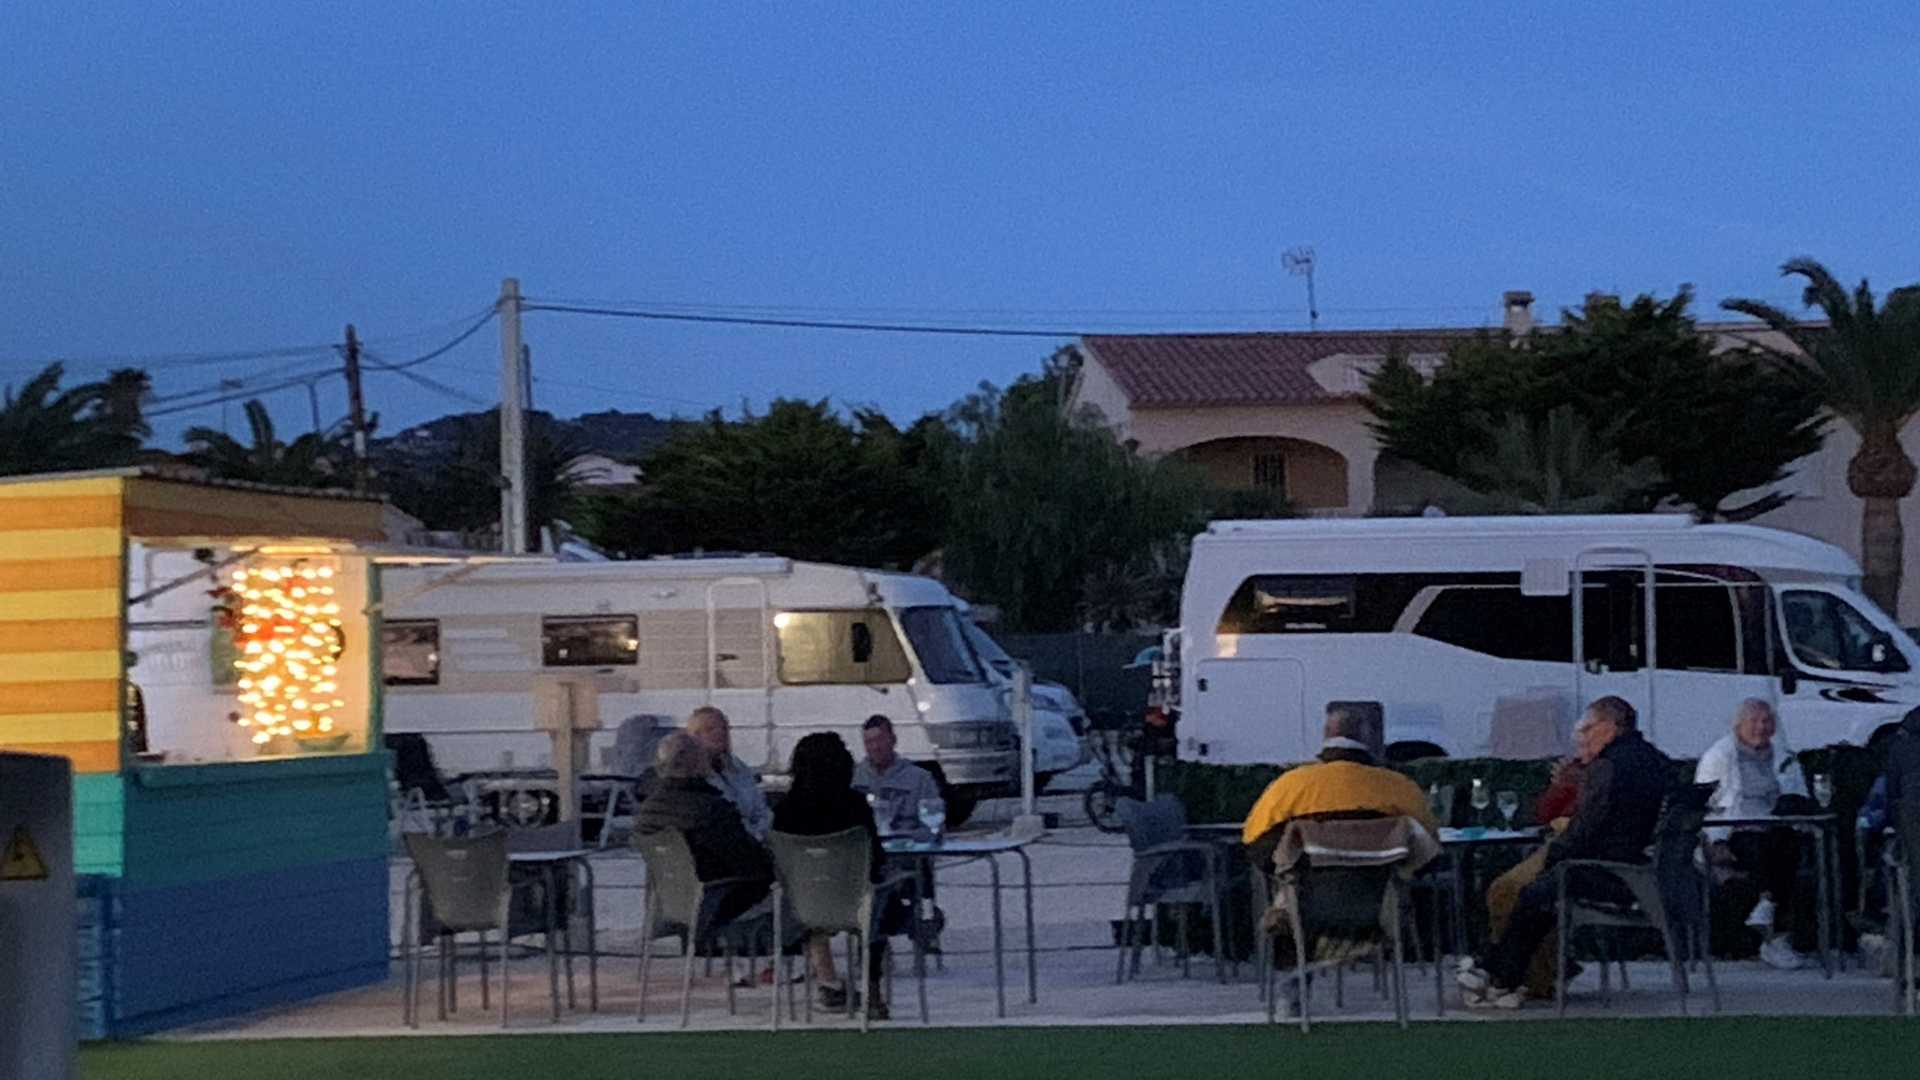 campers marysol camping park calp,